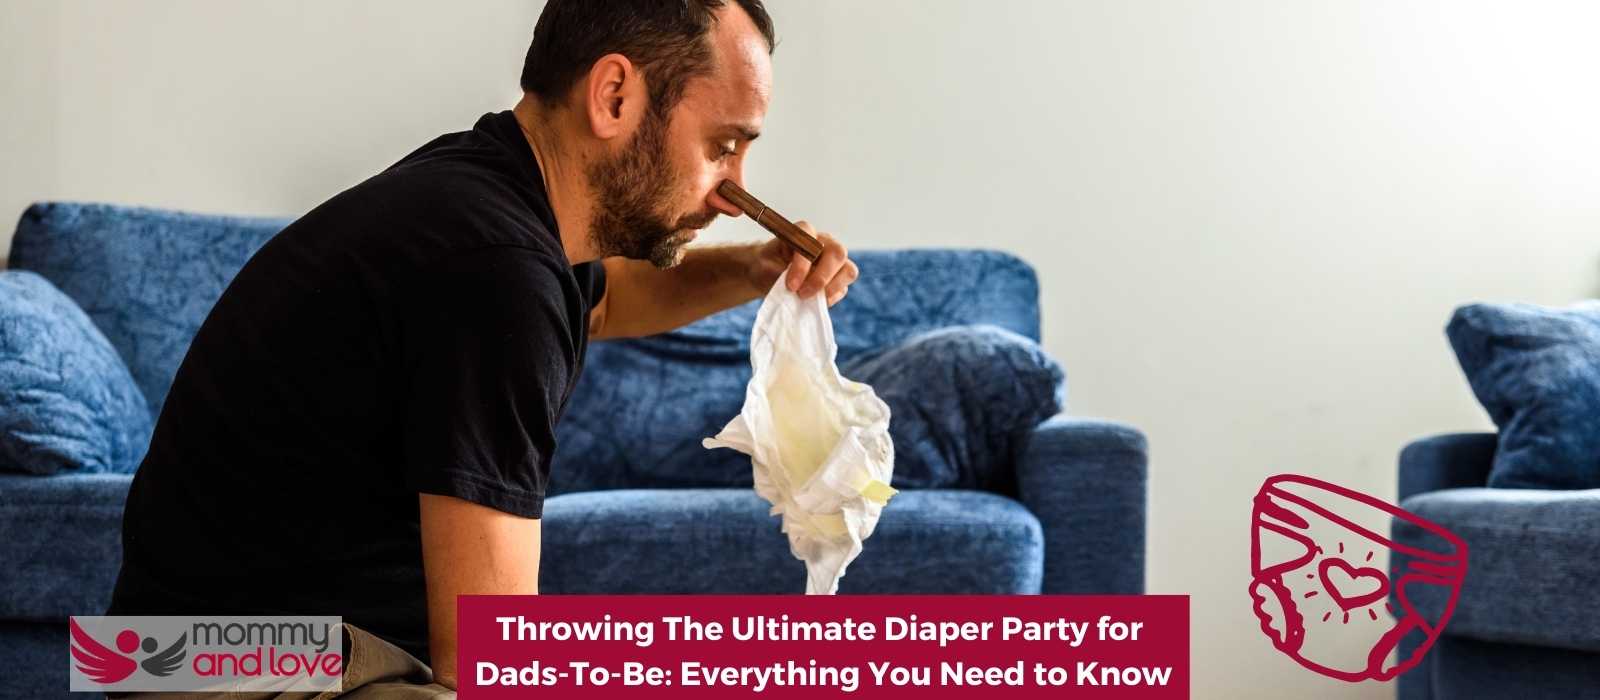 Throwing The Ultimate Diaper Party for Dads-To-Be Everything You Need to Know